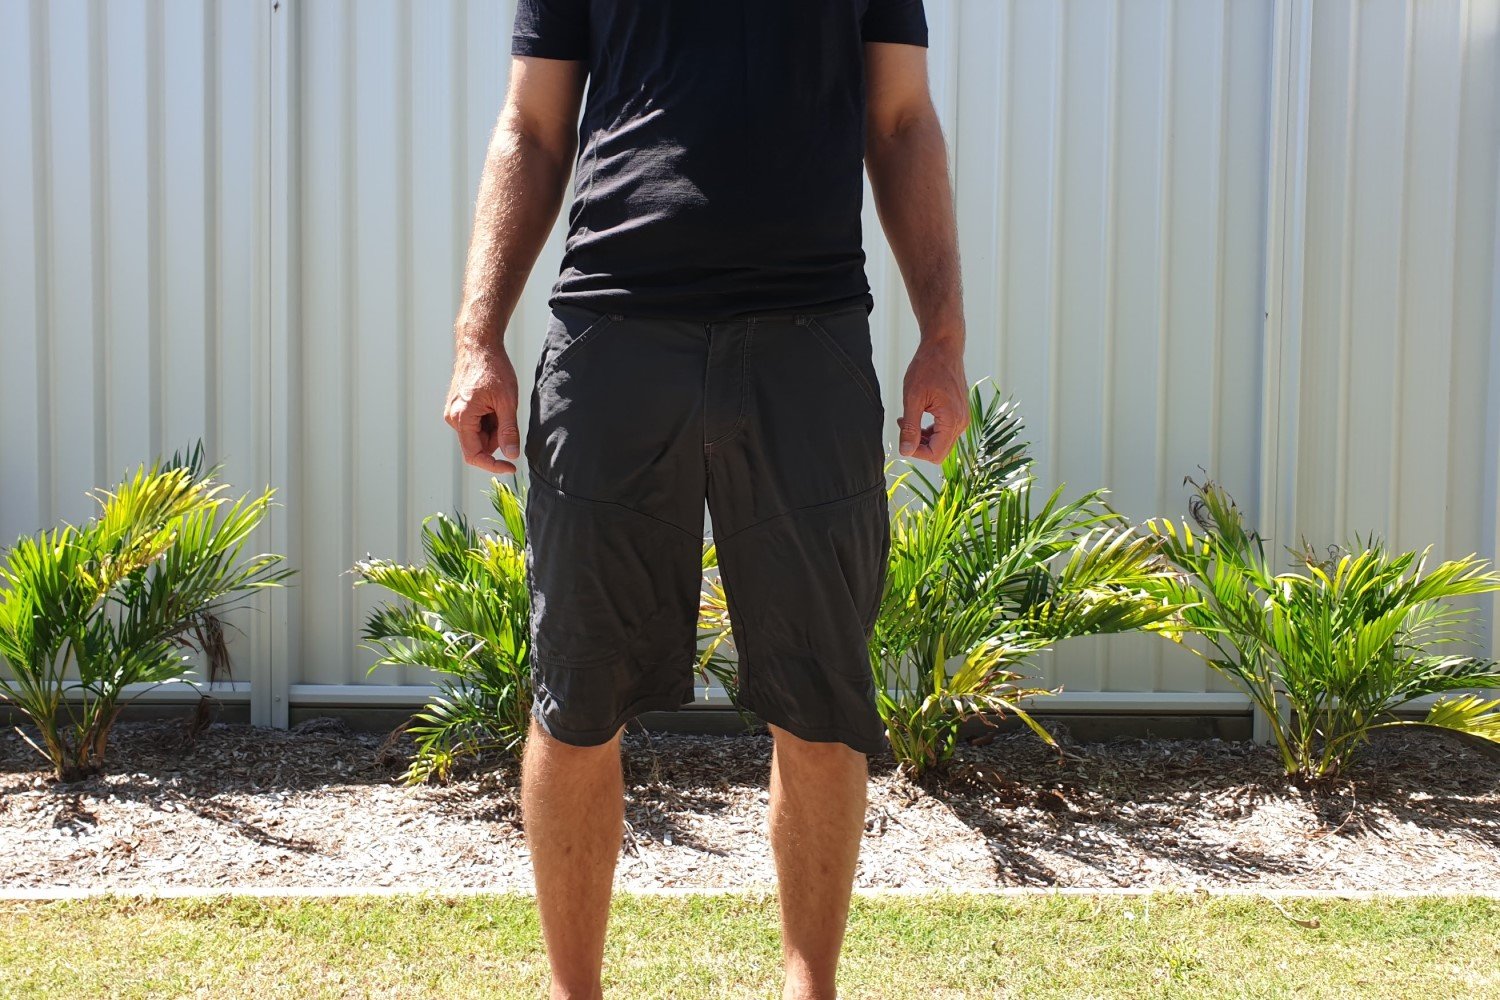 KÜHL Silencr Hiking Shorts review – Backpackers Review